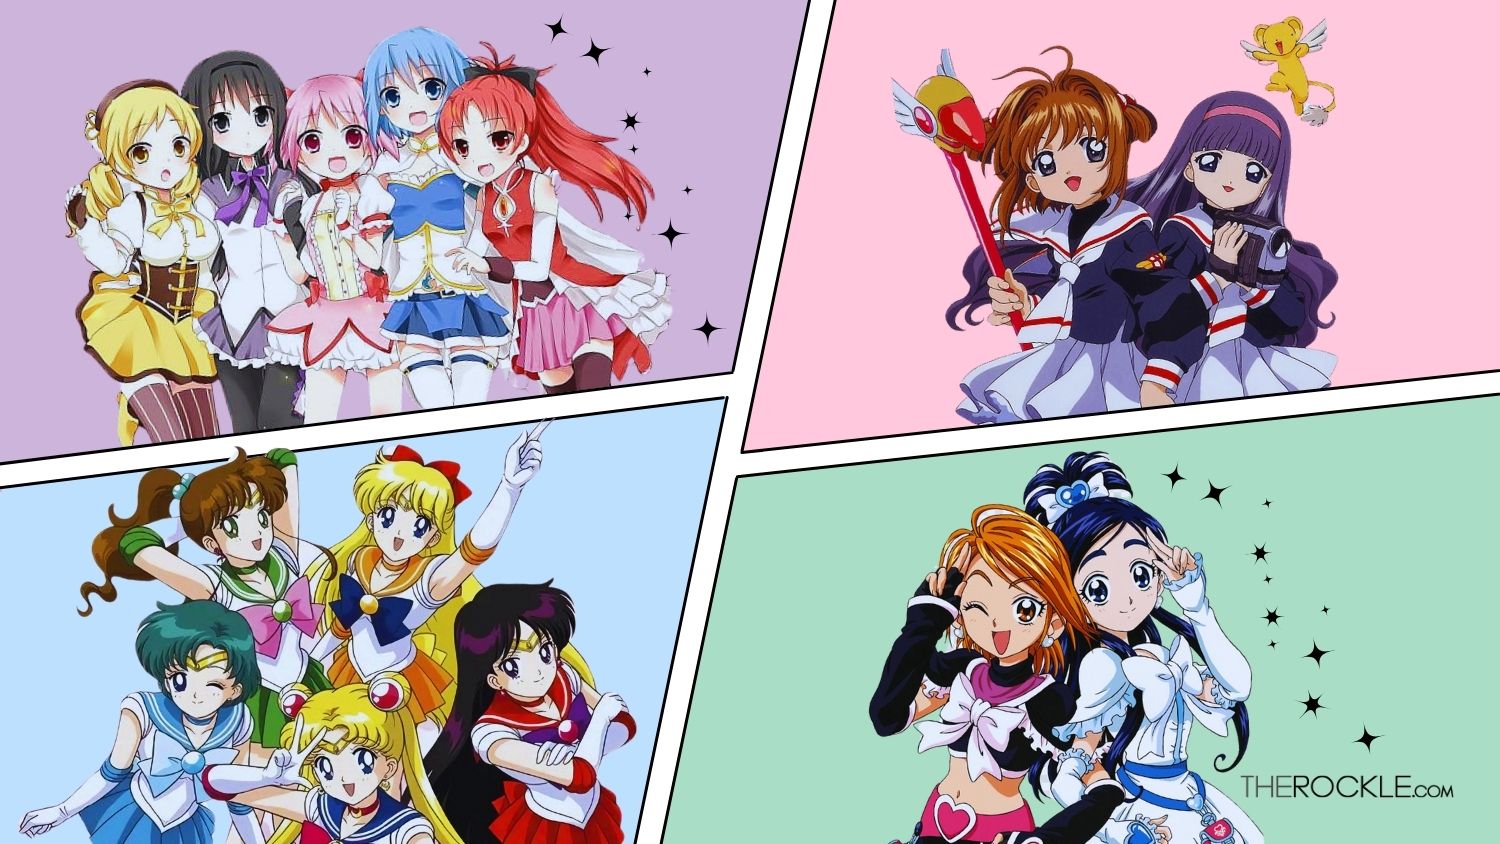 A collage of protagonists from magical girl anime